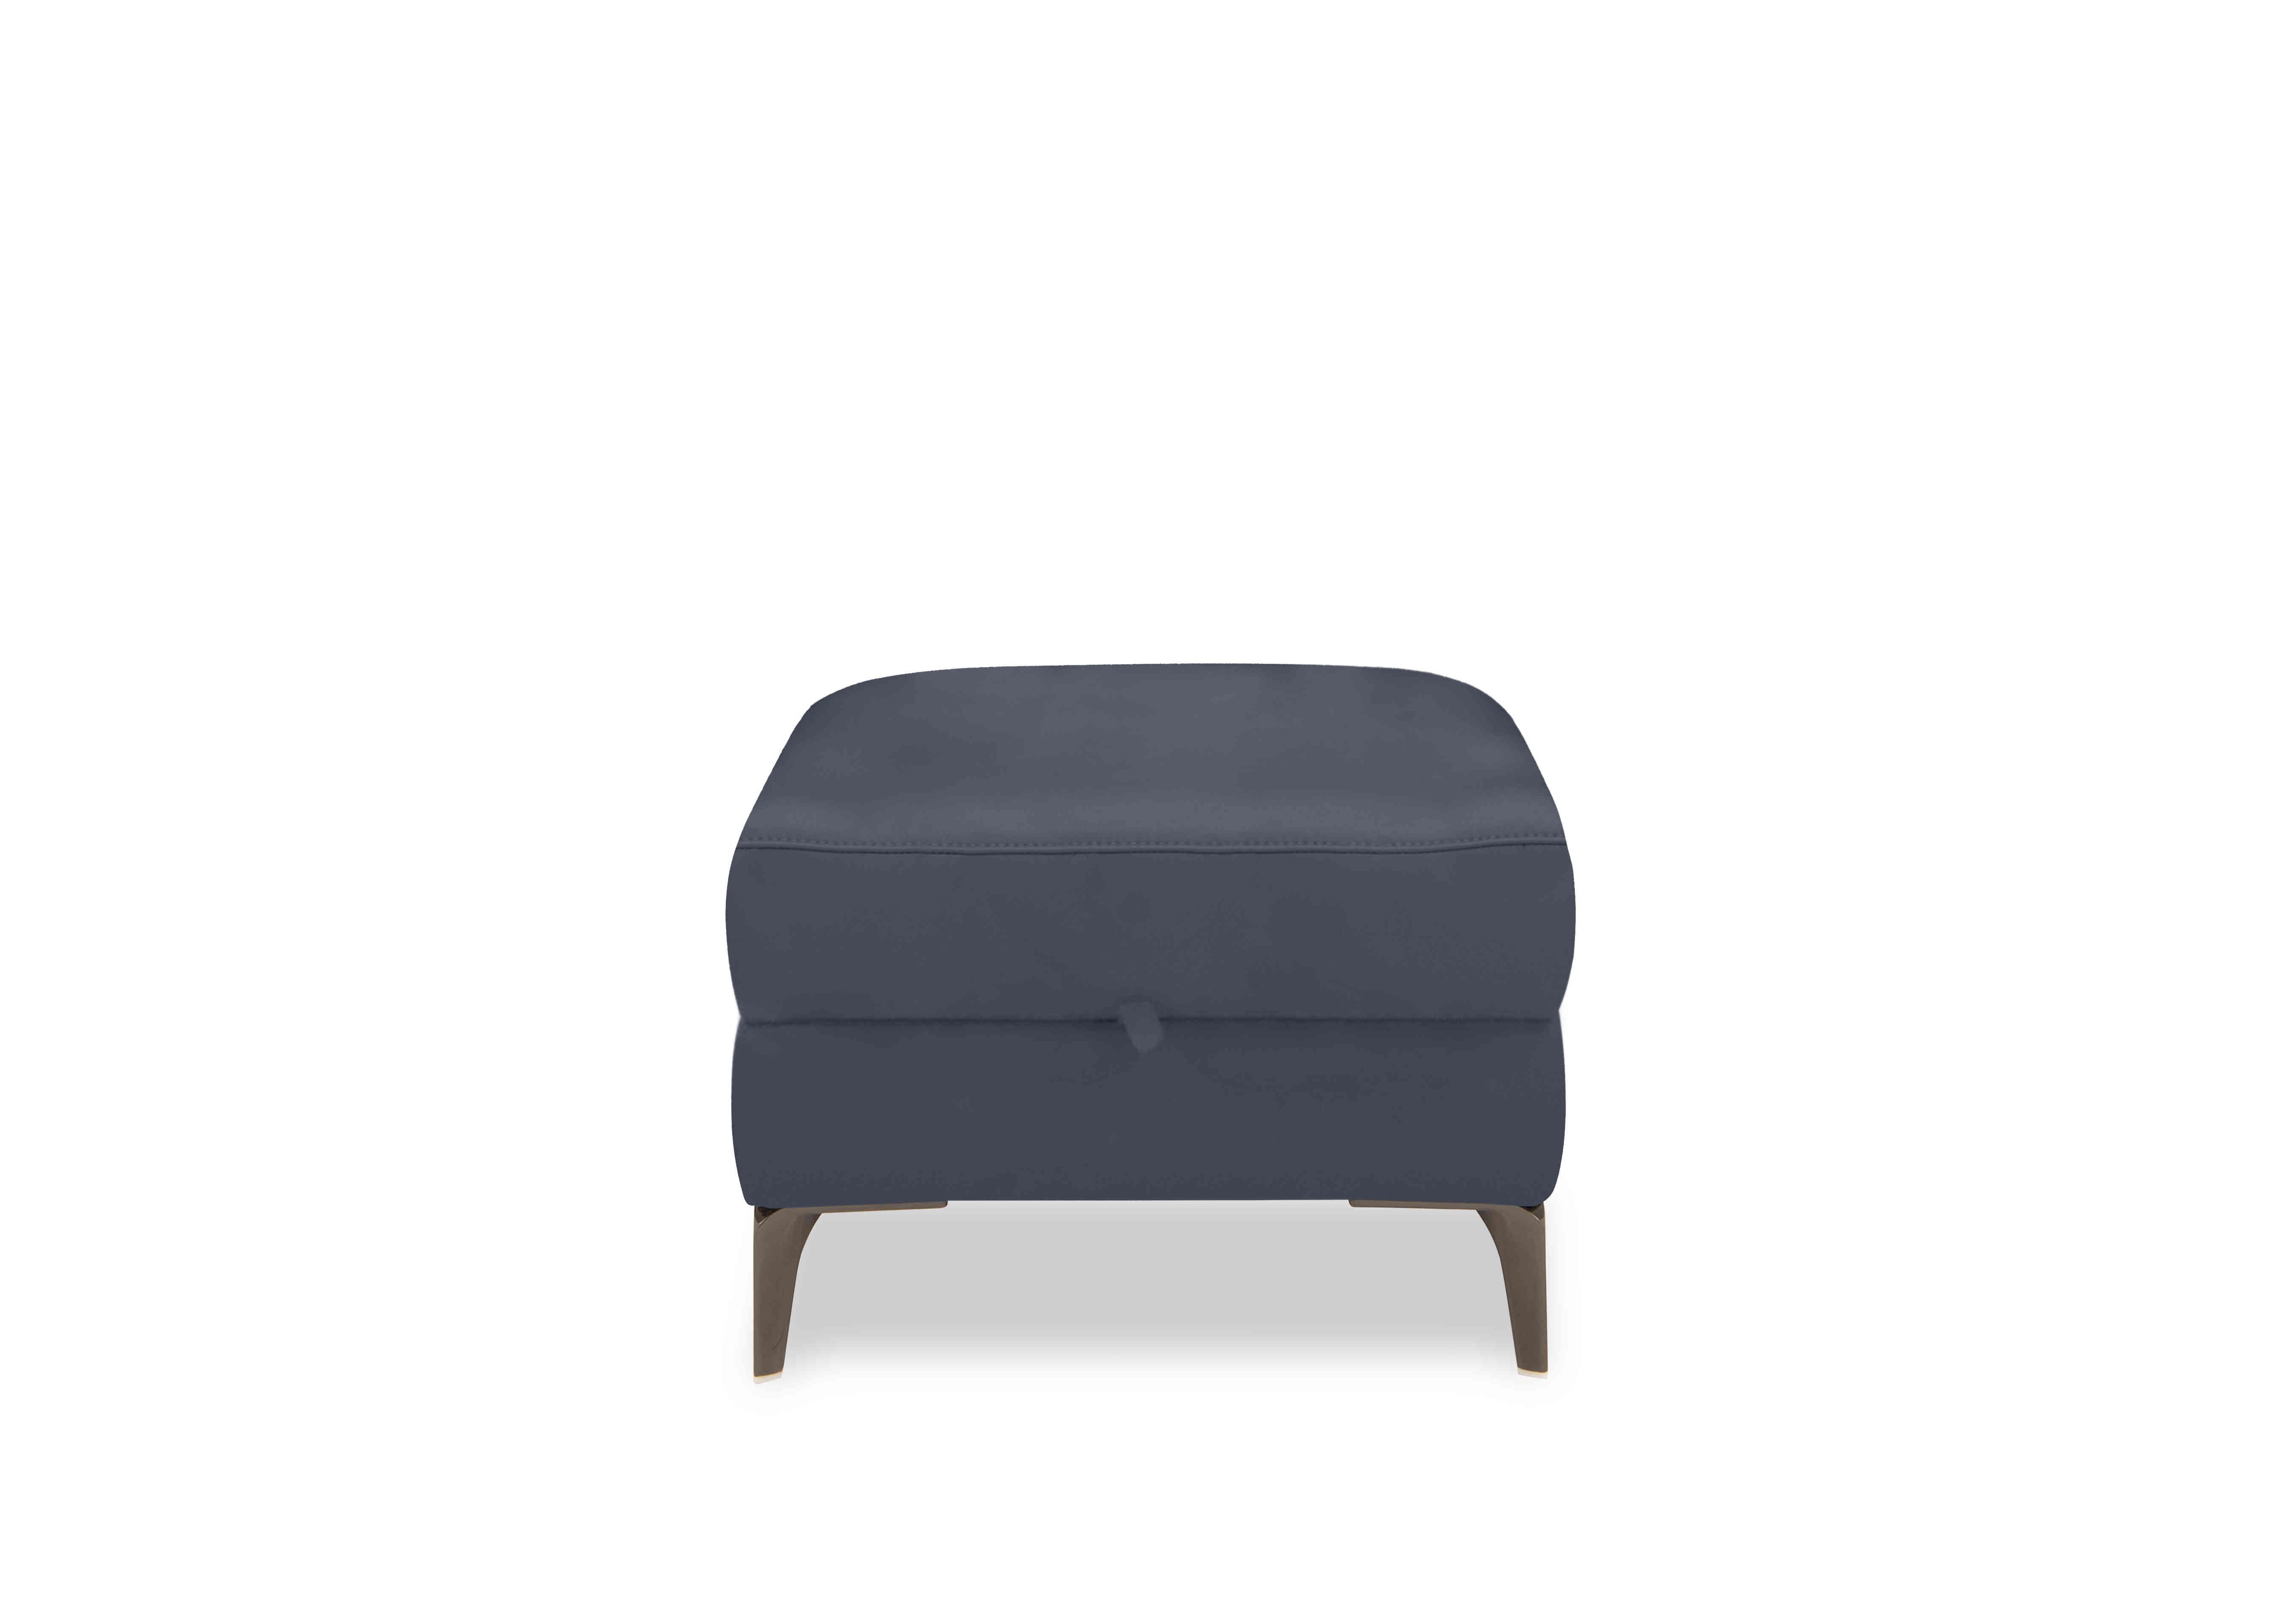 New York Leather Storage Footstool in Bv-313e Ocean Blue on Furniture Village